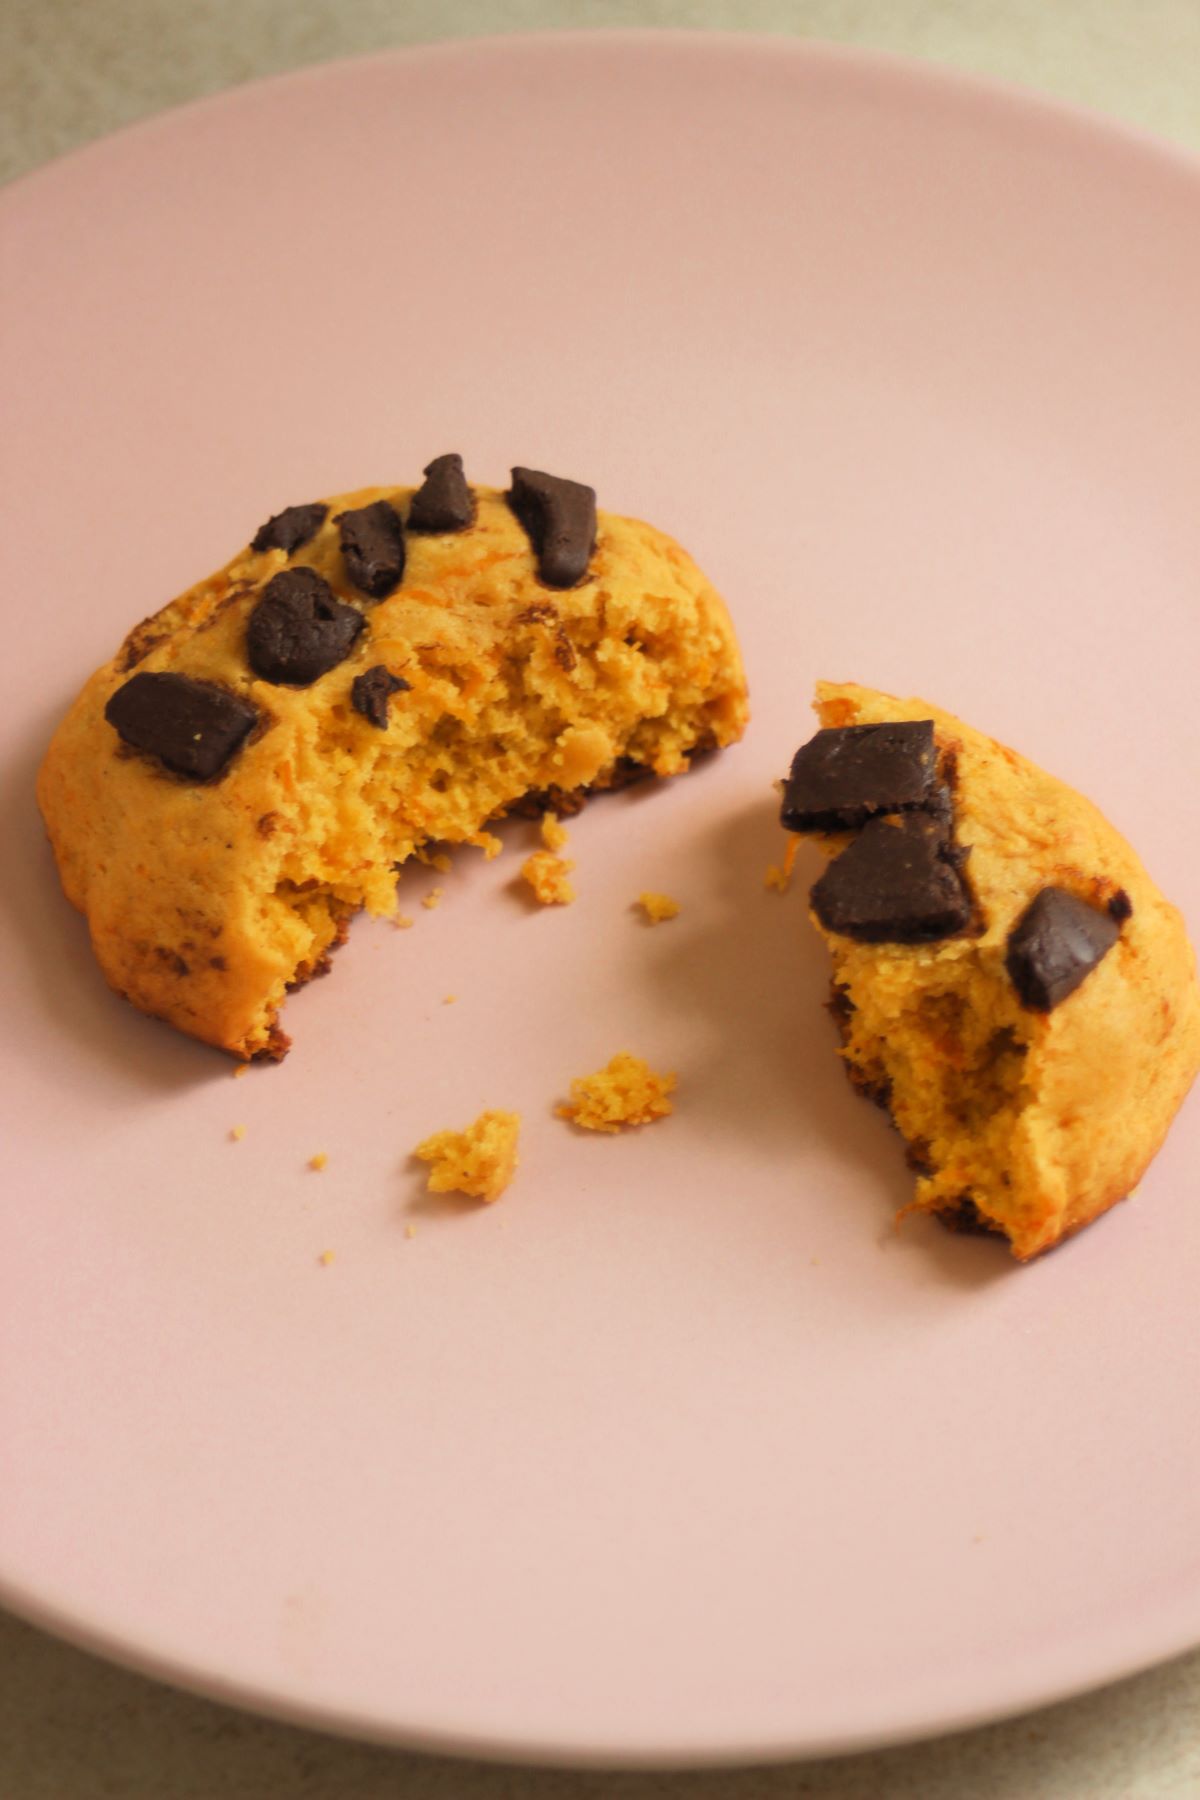 Broken pumpkin cookie with chocolate chunks on a pink plate.